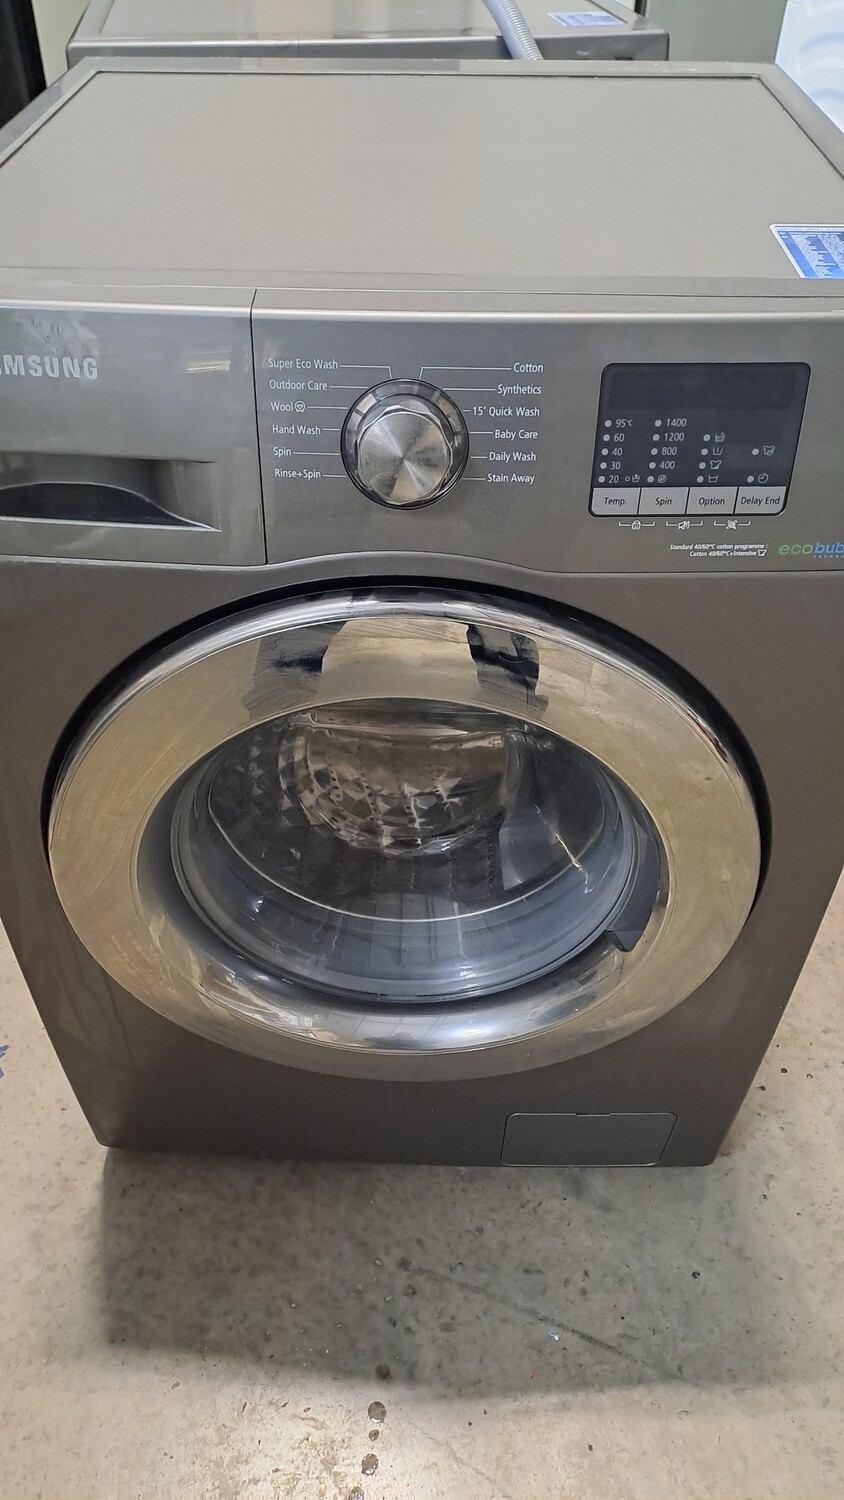 Samsung WF70F5E2W4X 7kg 1400rpm Washing Machine Grey,This item is located in our Whitby Road shop